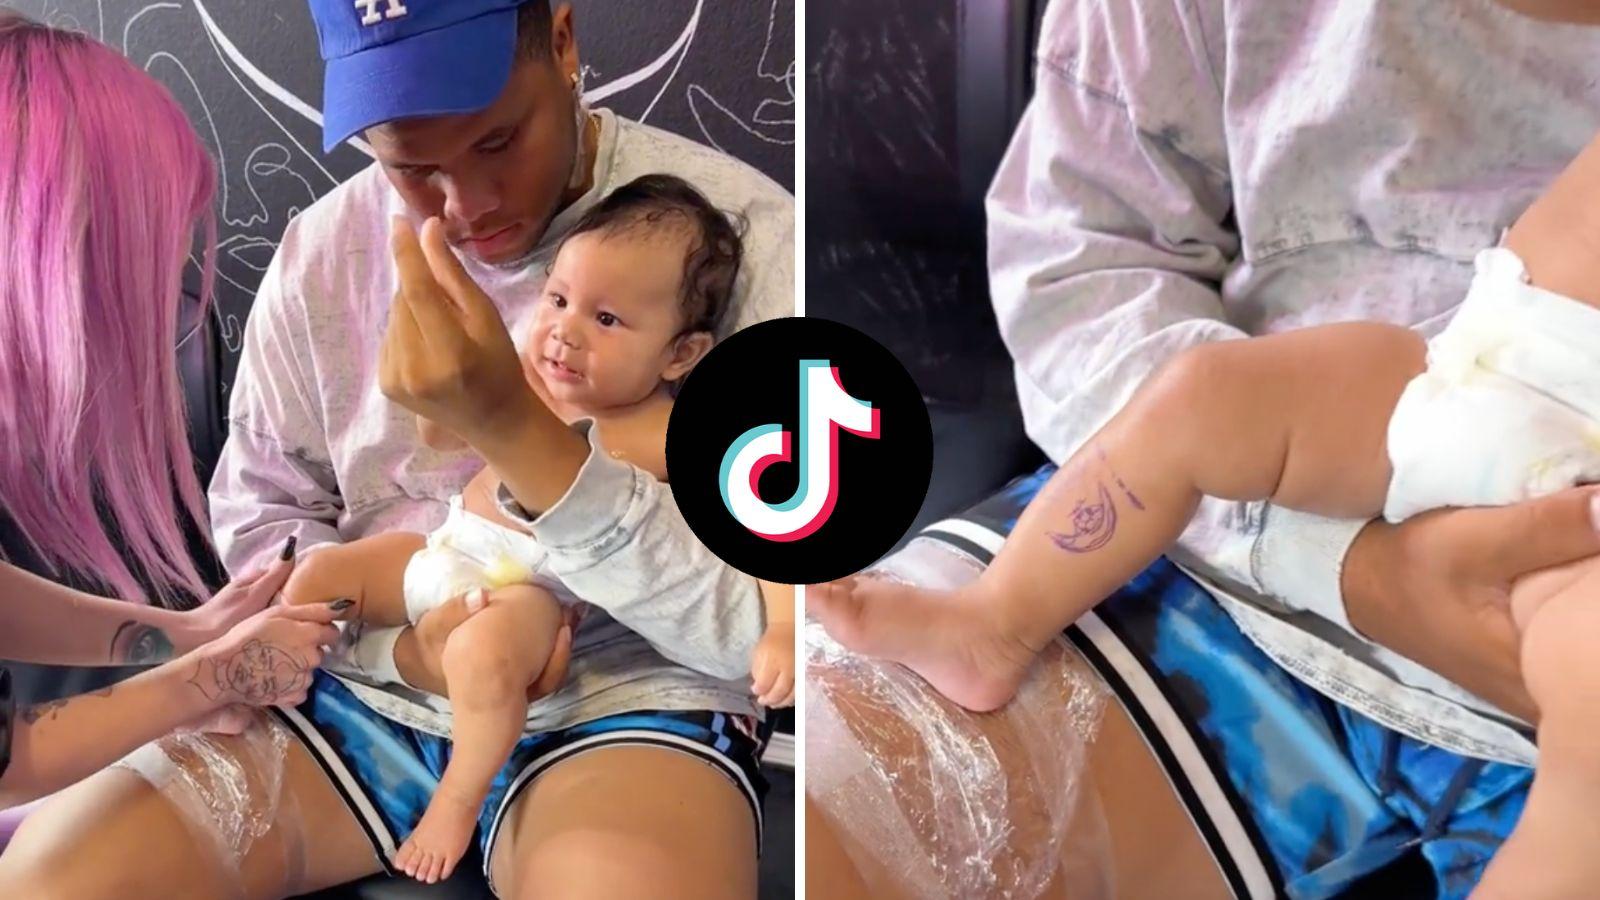 Screenshots from viral TikTok video of baby getting inked